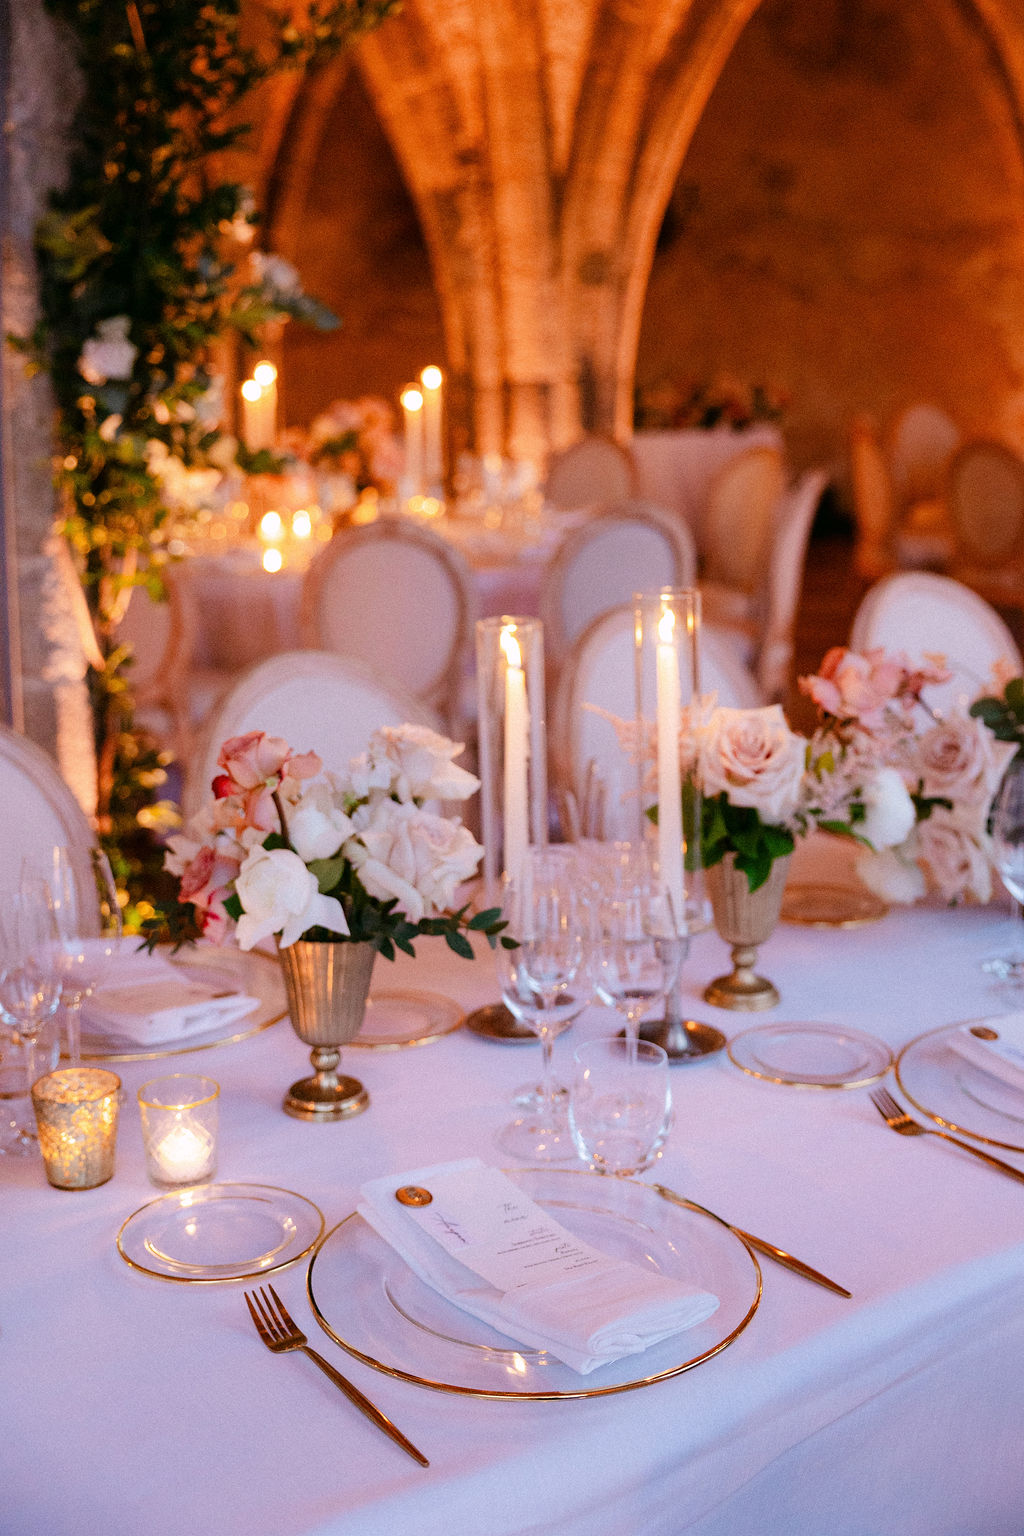 wedding tablescape with flowers by candlelight